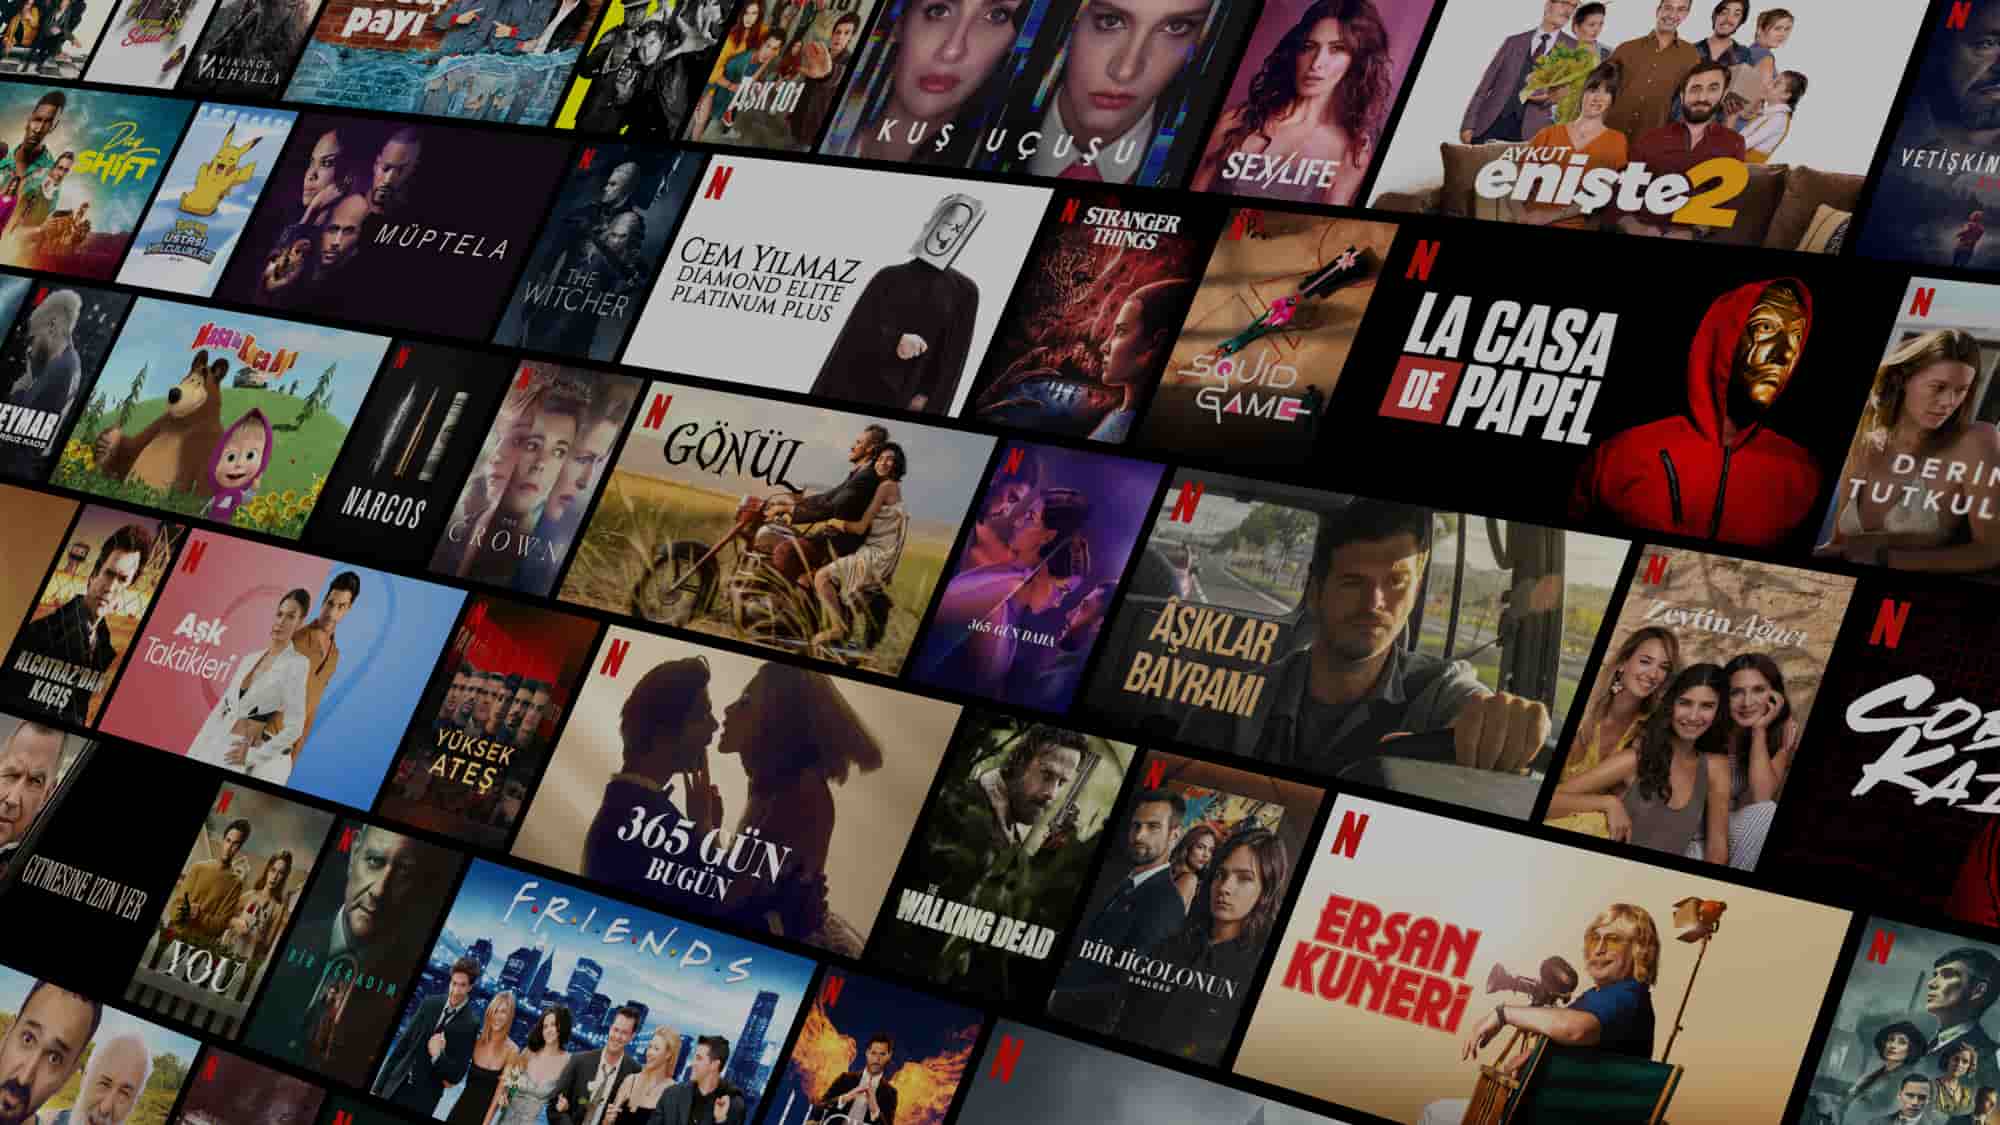 How Much Does Netflix Price? What is the Monthly Subscription Fee?